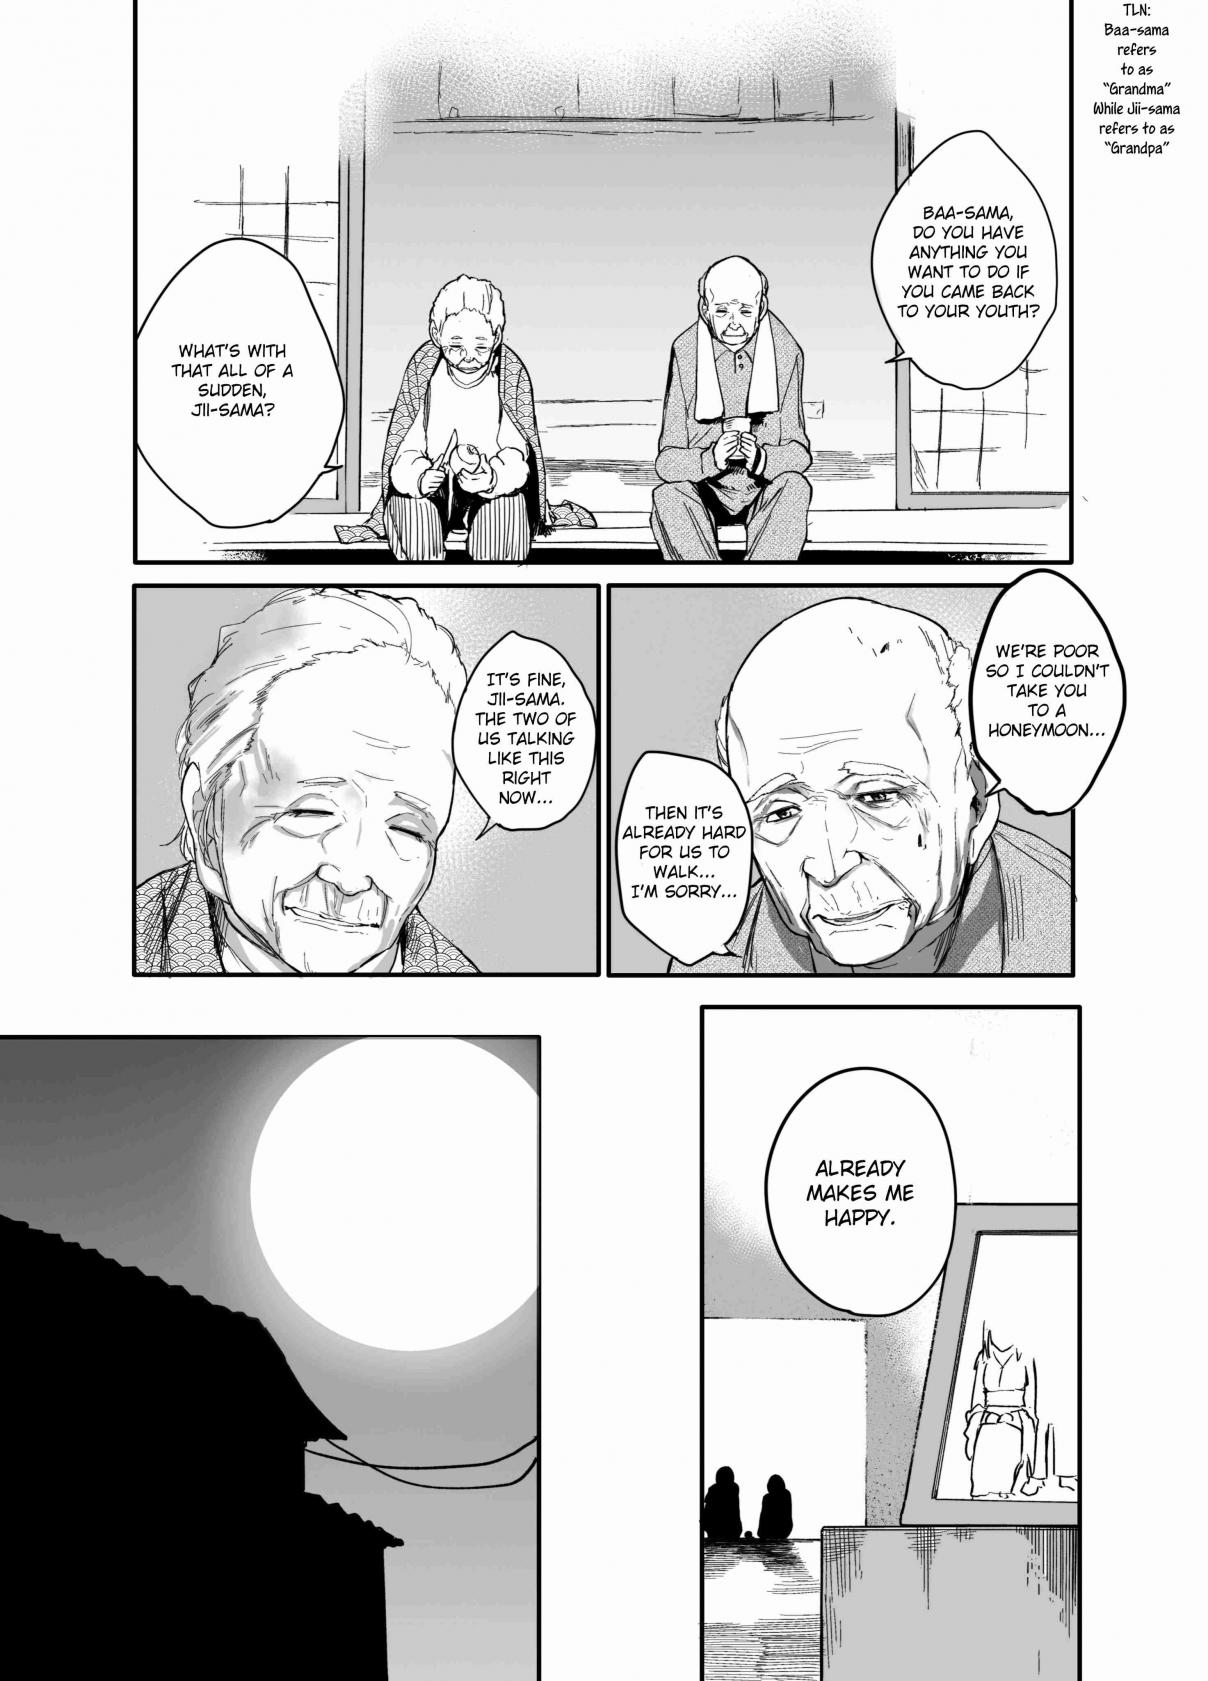 A Story About A Grampa and Granma Returned Back to their Youth. Ch. 1